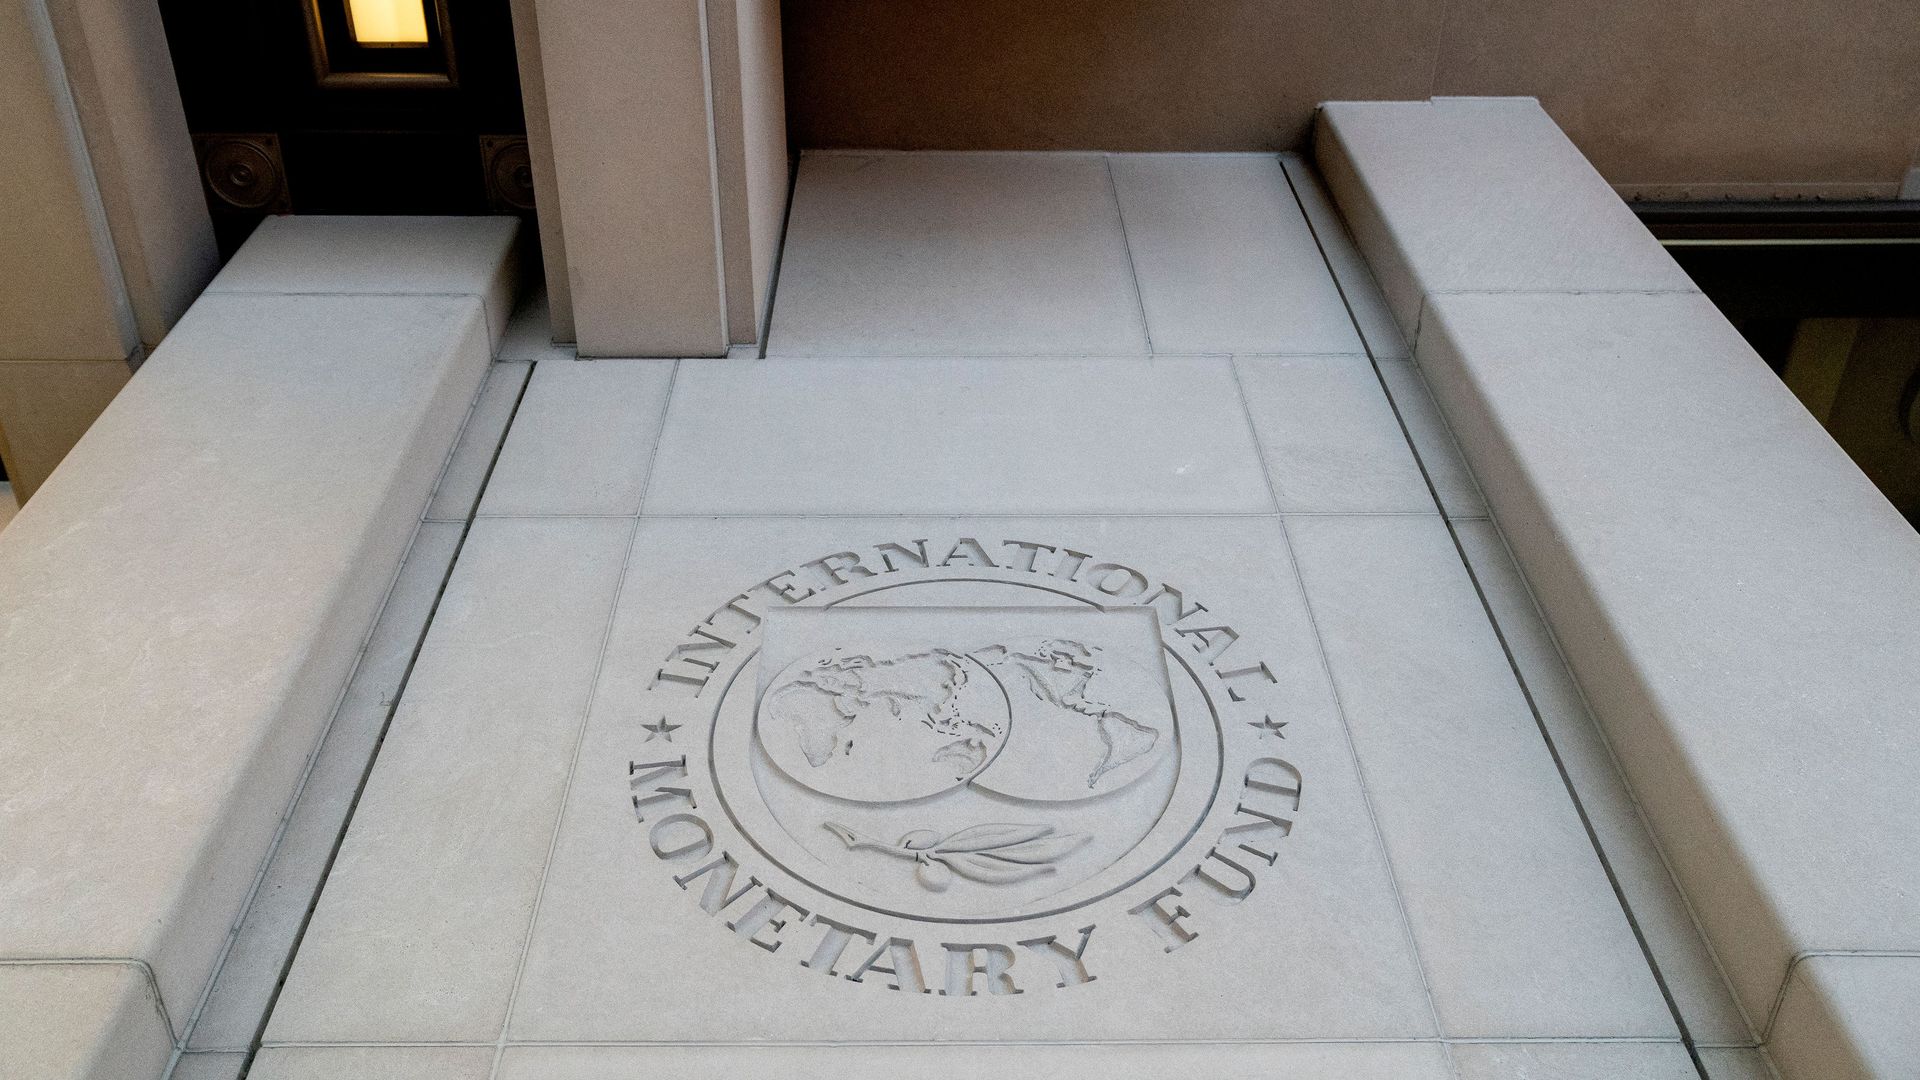 The seal for the International Monetary Fund (IMF) is seen in Washington, DC on January 10, 2022.